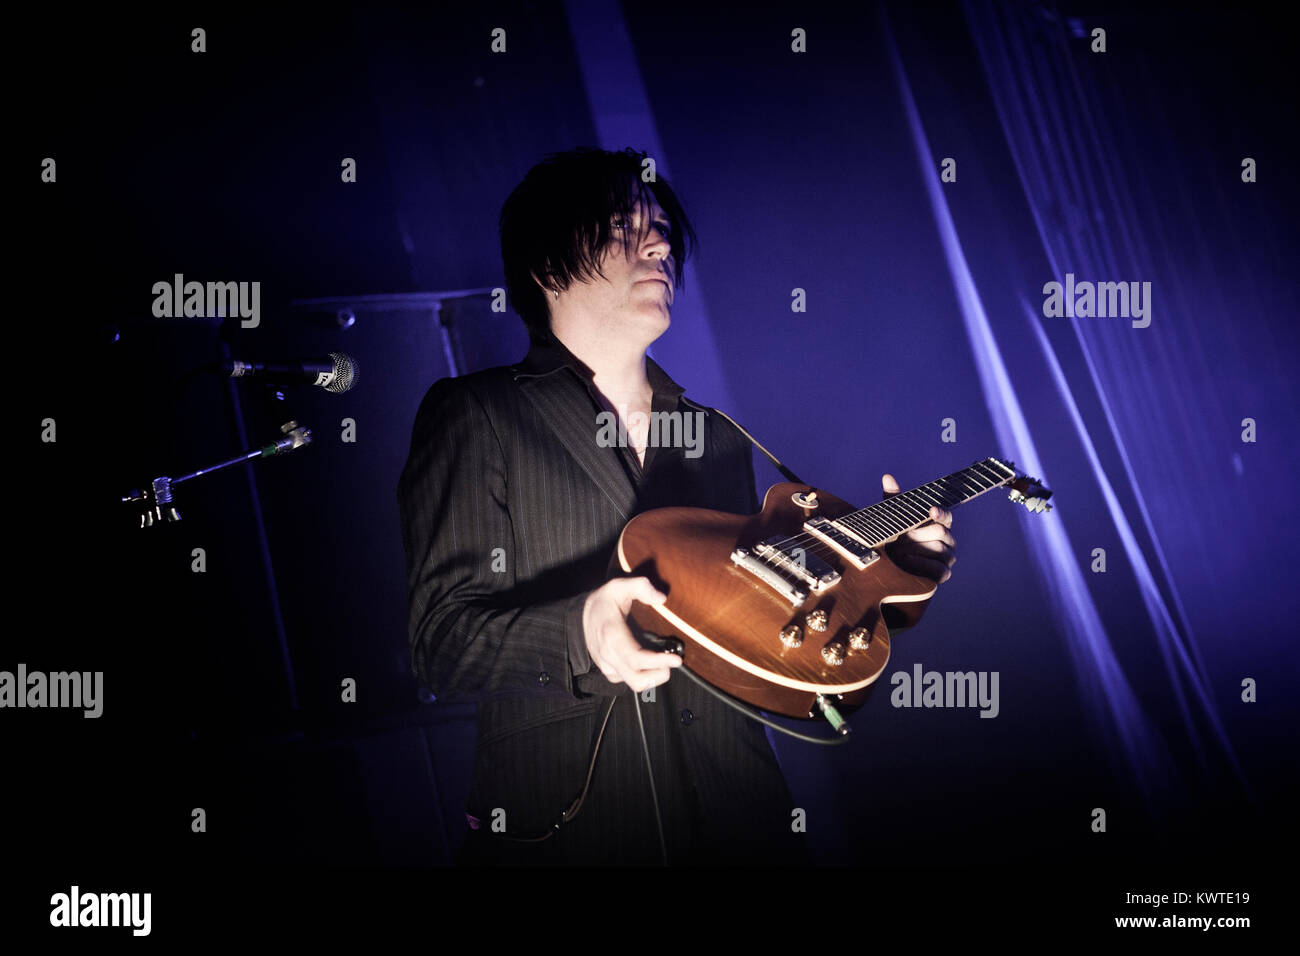 The American rock band Queens of the Stone Age performs a live concert at Vega in Copenhagen. Here guitarist Troy Van Leeuwen is pictured live on stage. Denmark 08/05 2011. Stock Photo